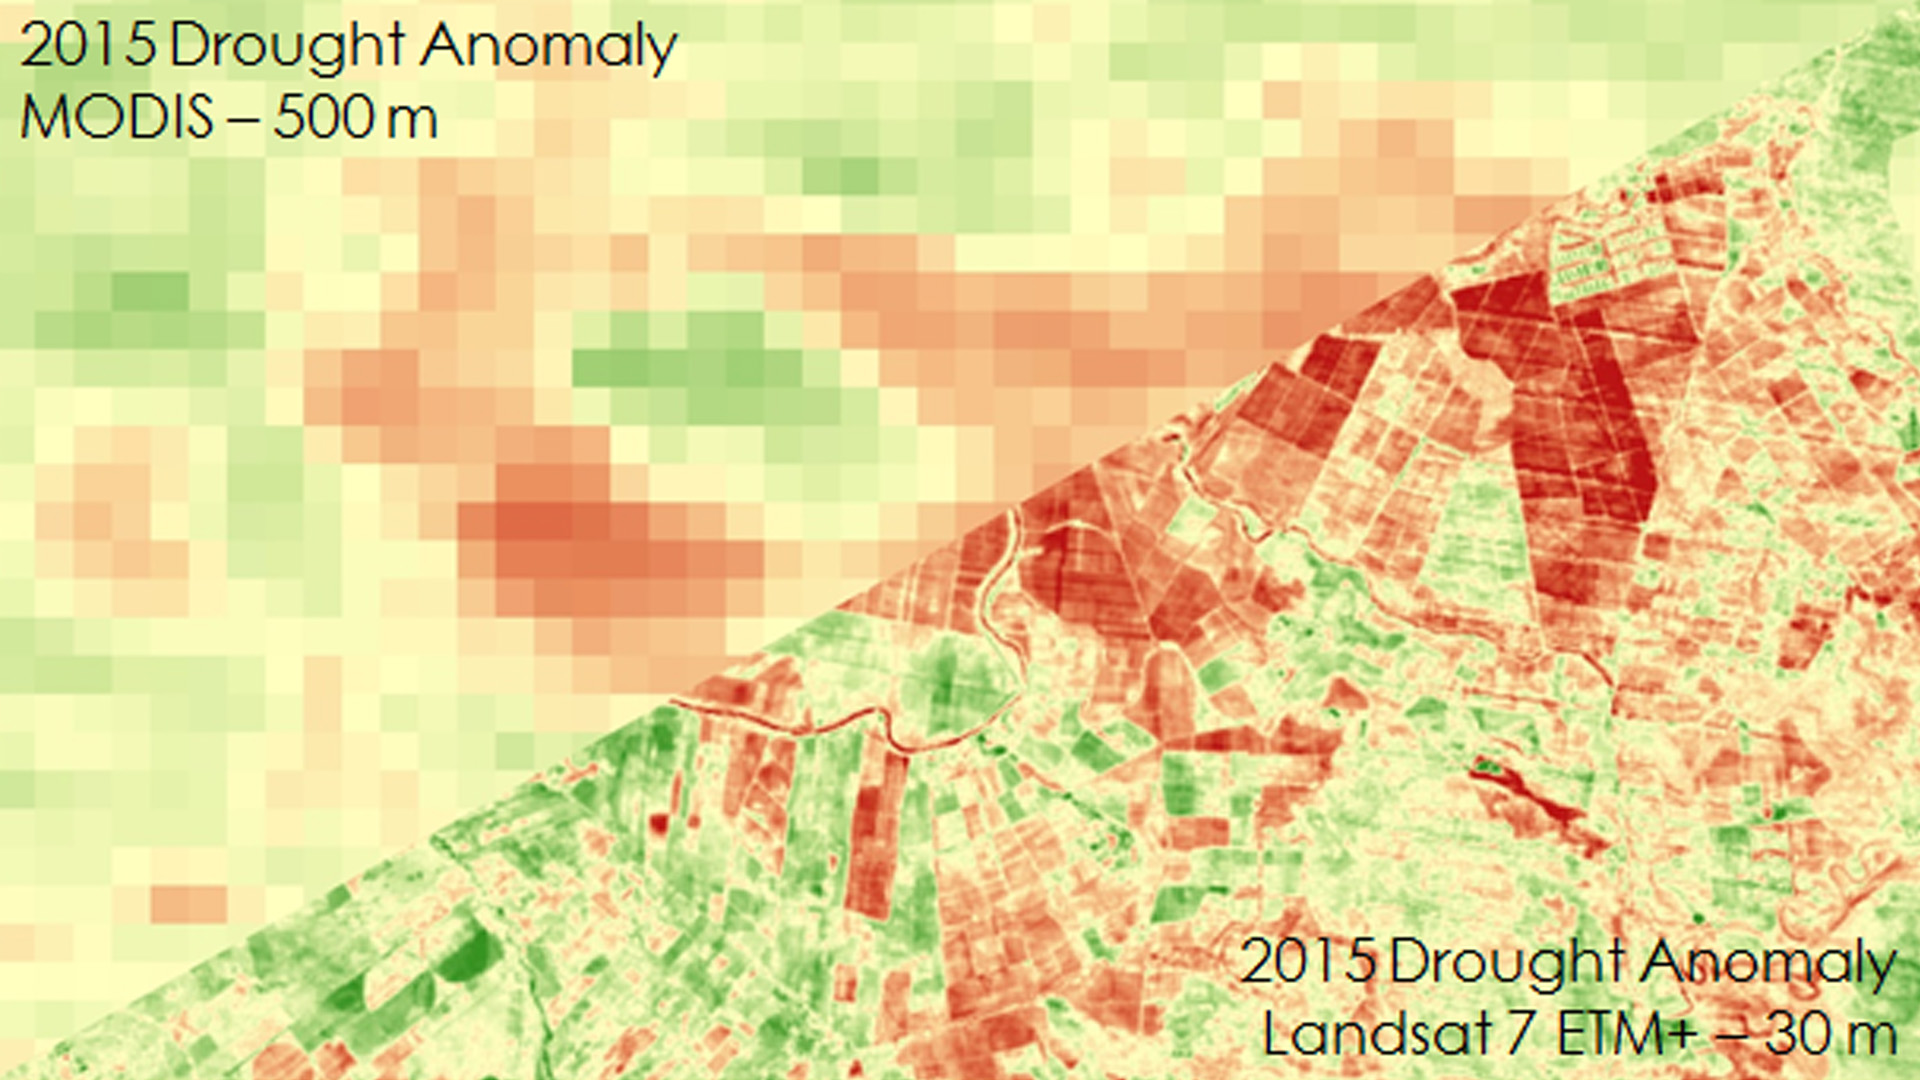 The agricultural fields of La Flor, Costa Rica show the effects of the 2015 drought in this NDVI anomaly map from Landsat and MODIS. Image Credit: Costa Rica Agriculture II Team.